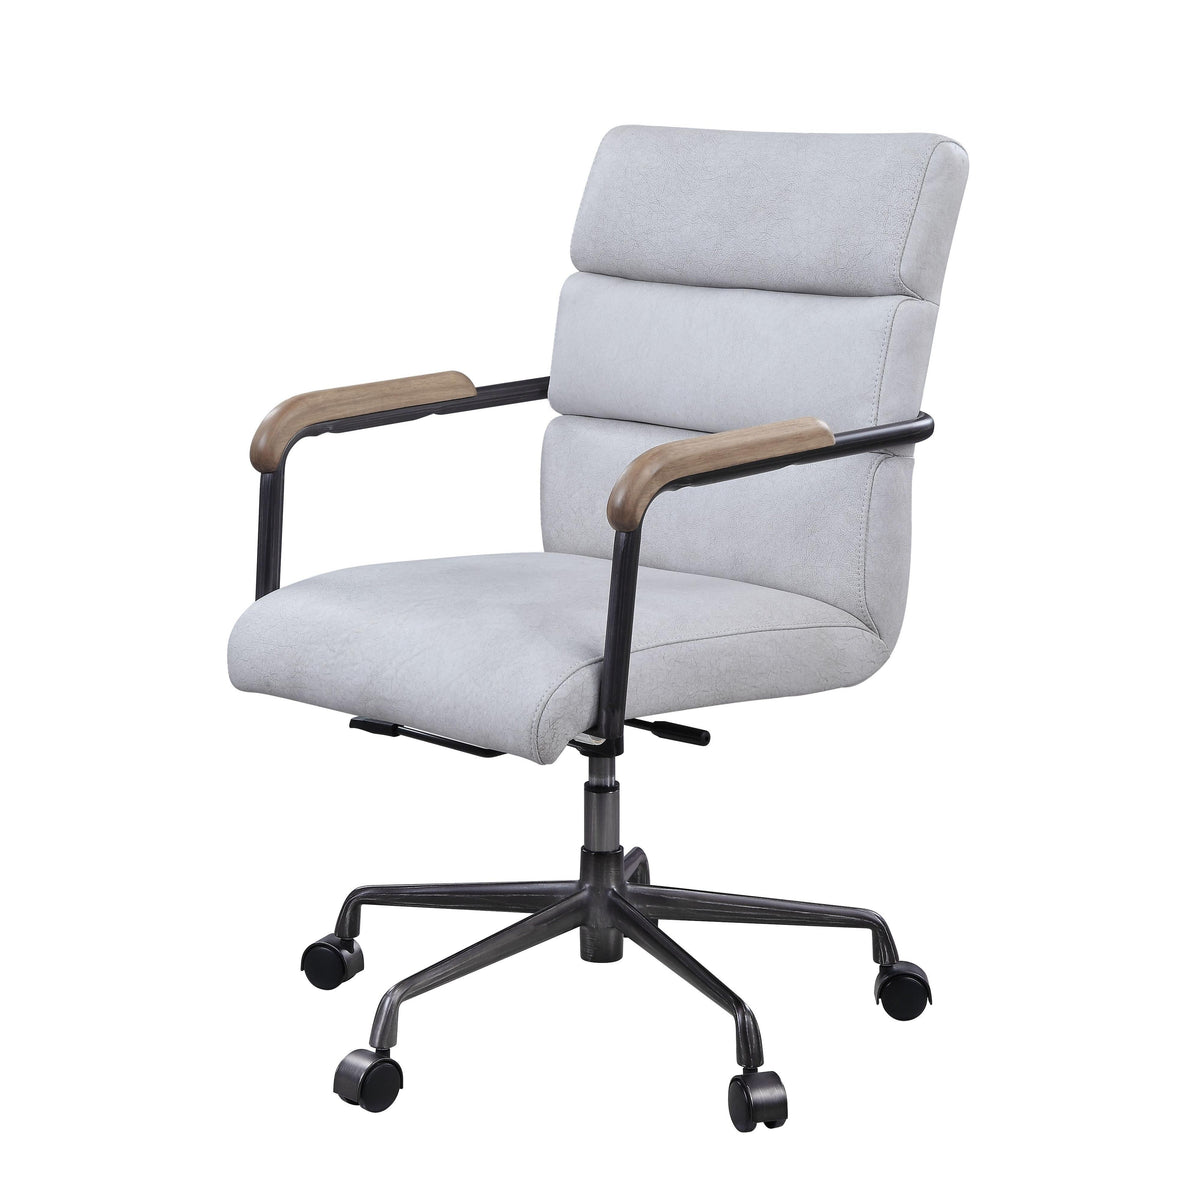 Acme Furniture Halcyon 93243 Office Chair - Vintage White